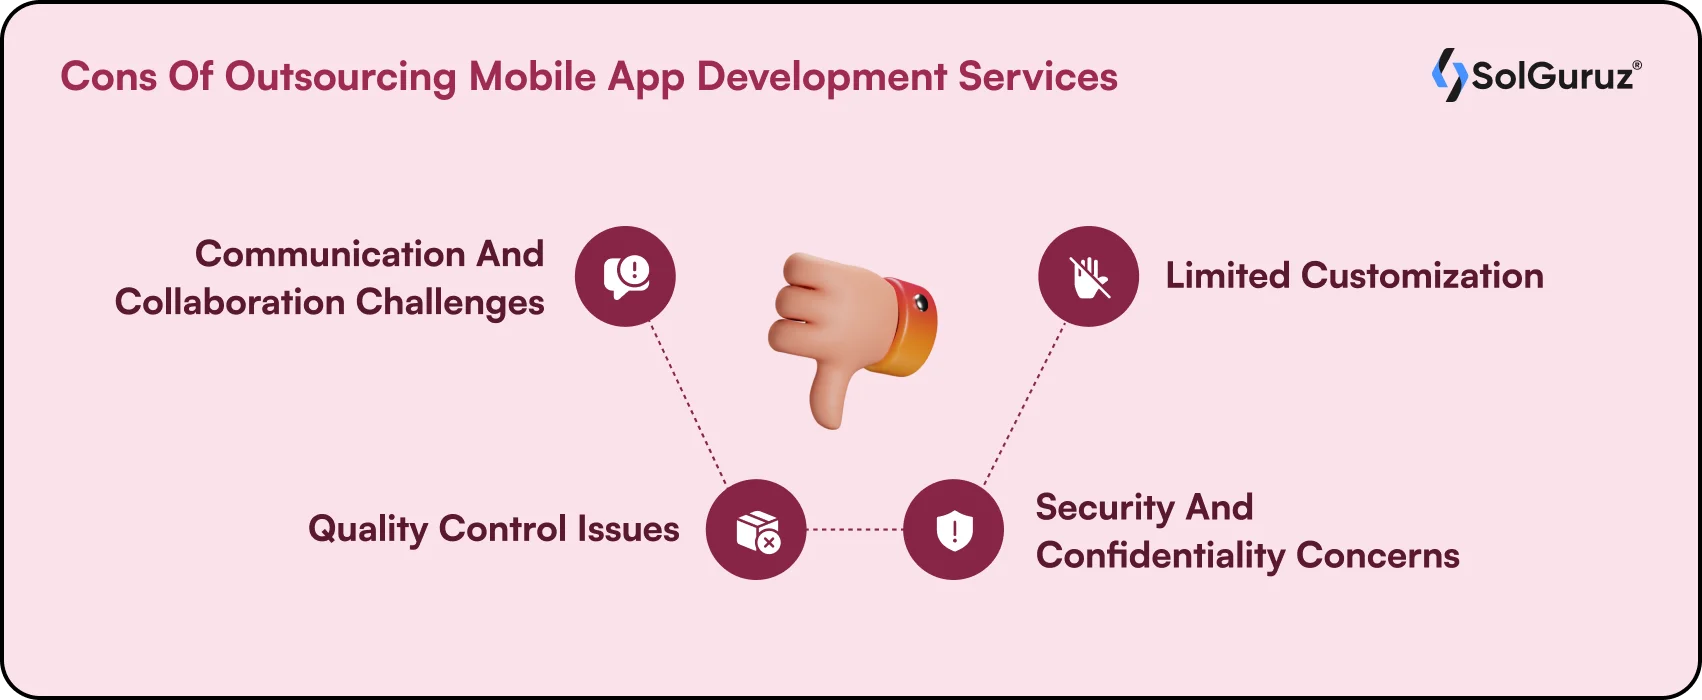 Cons Of Outsourcing Mobile App Development Services